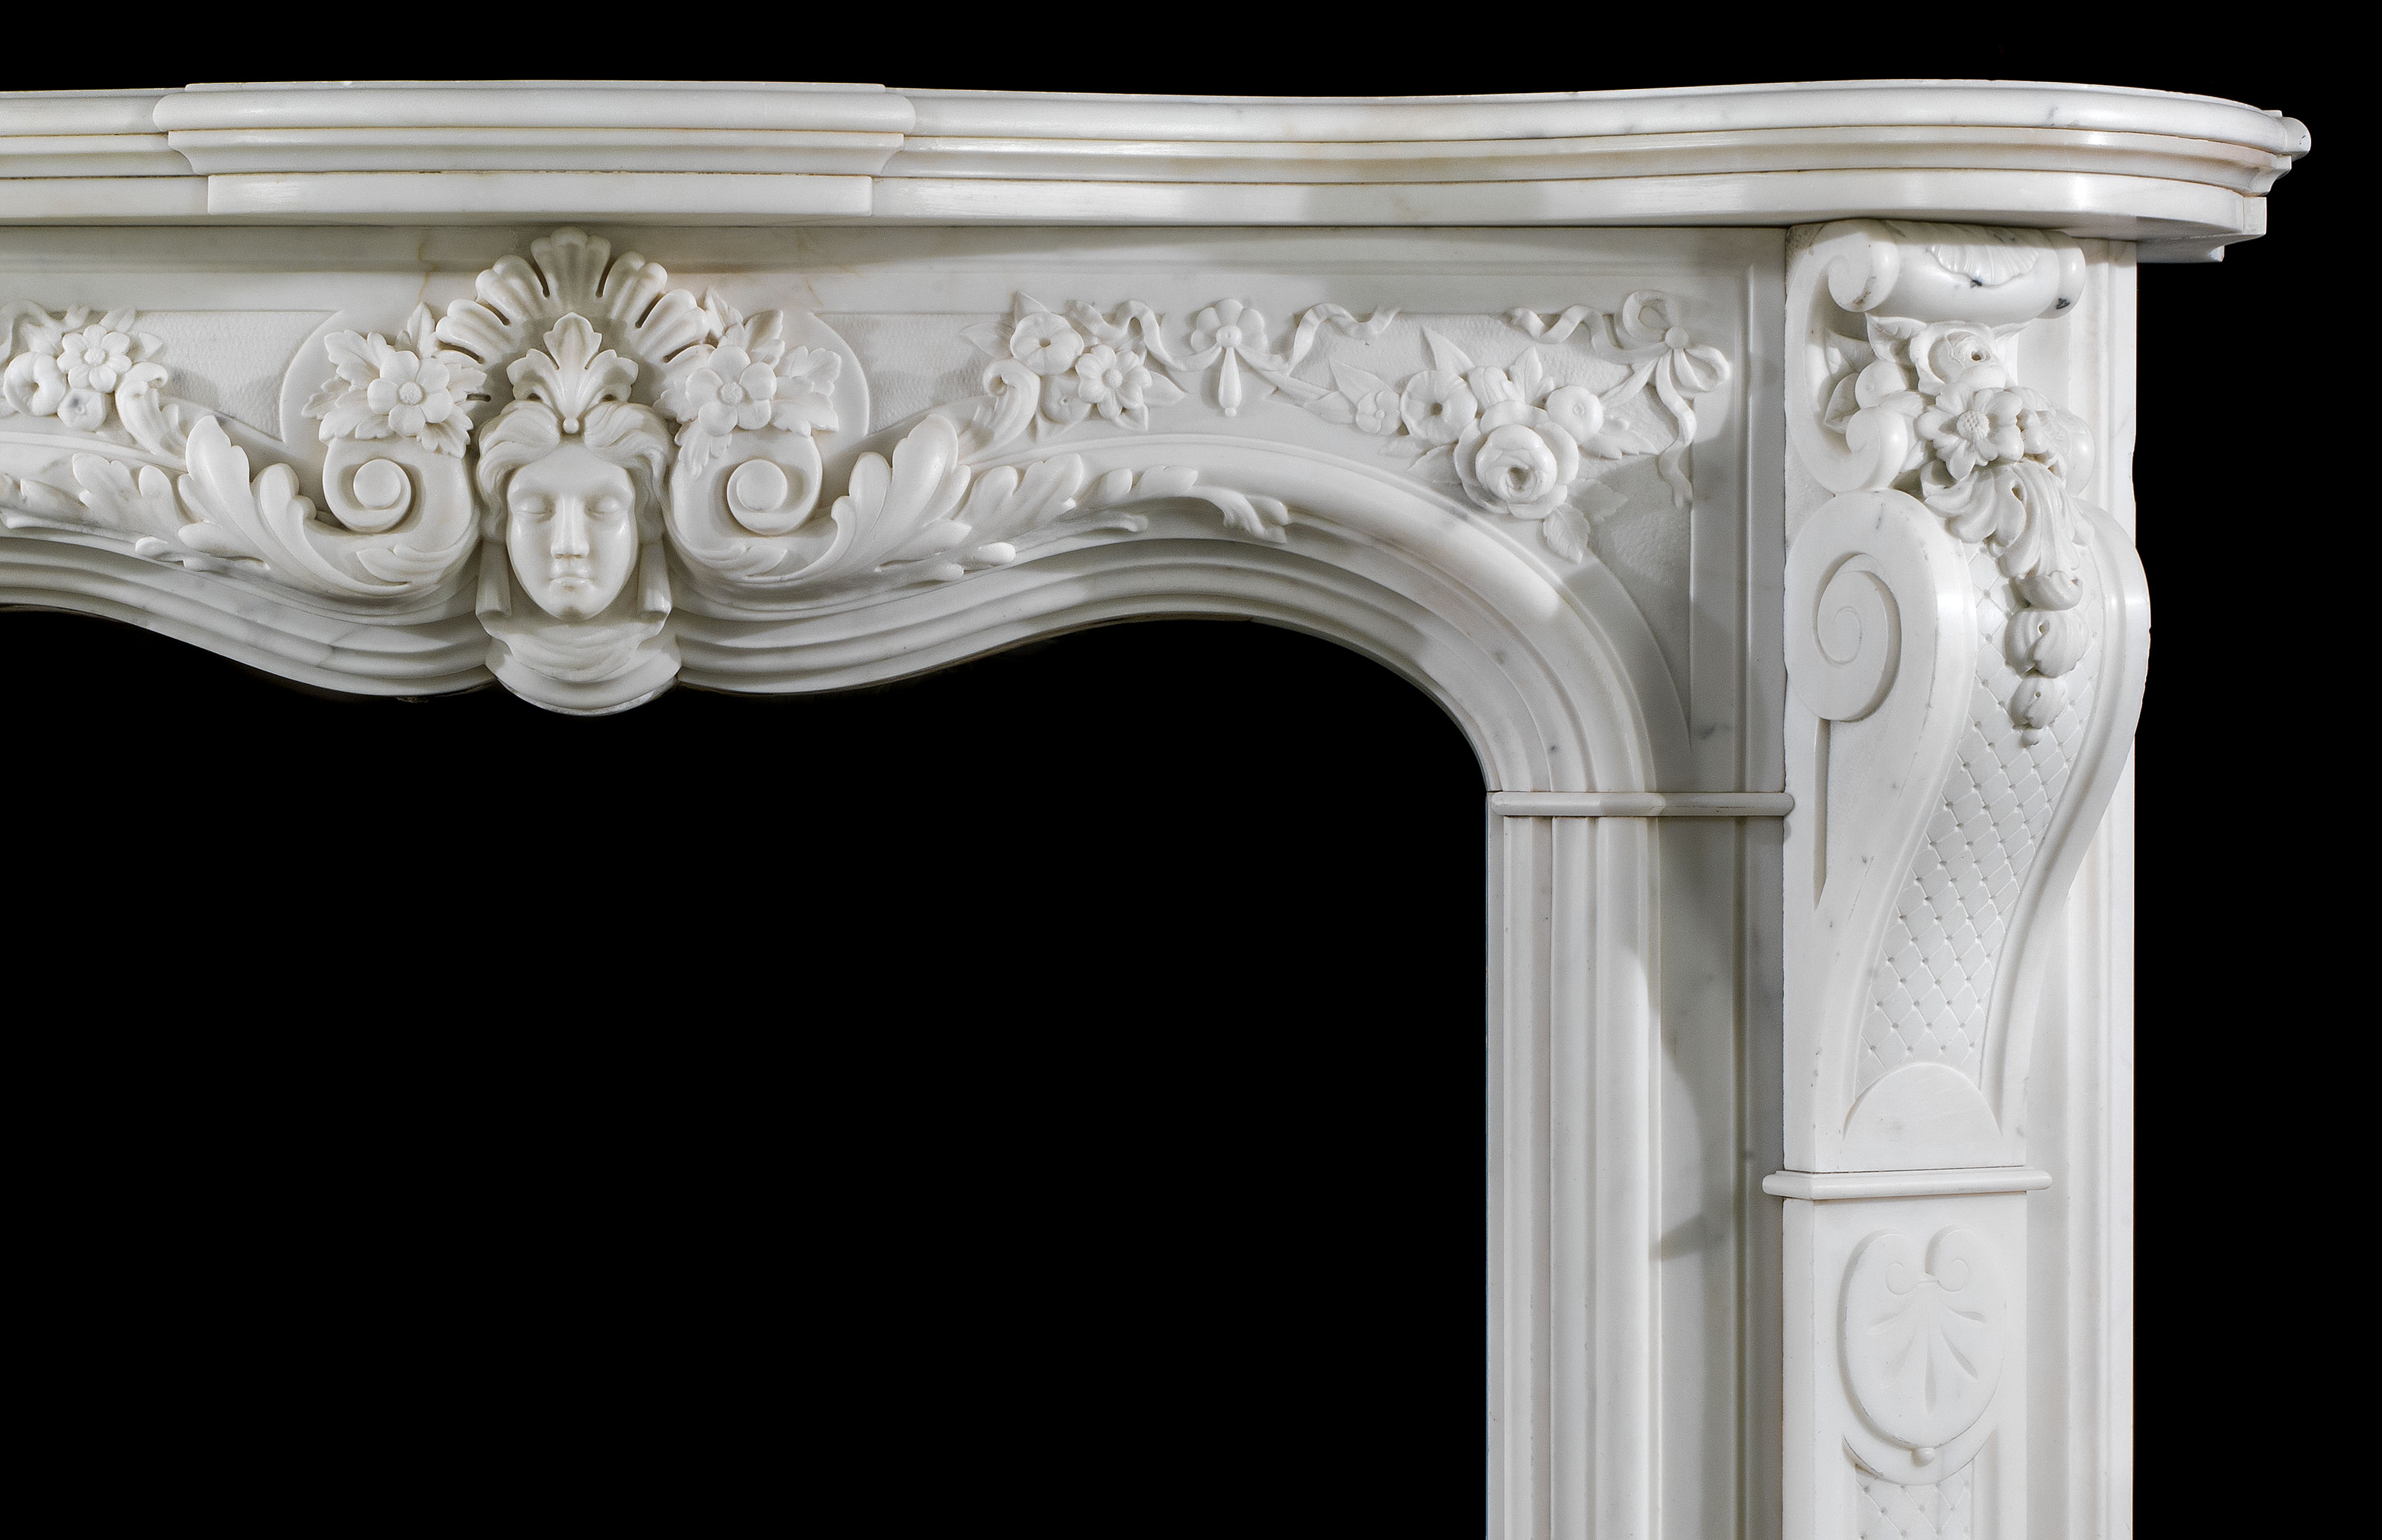 An antique Statuary Marble Rococo style fireplace surround